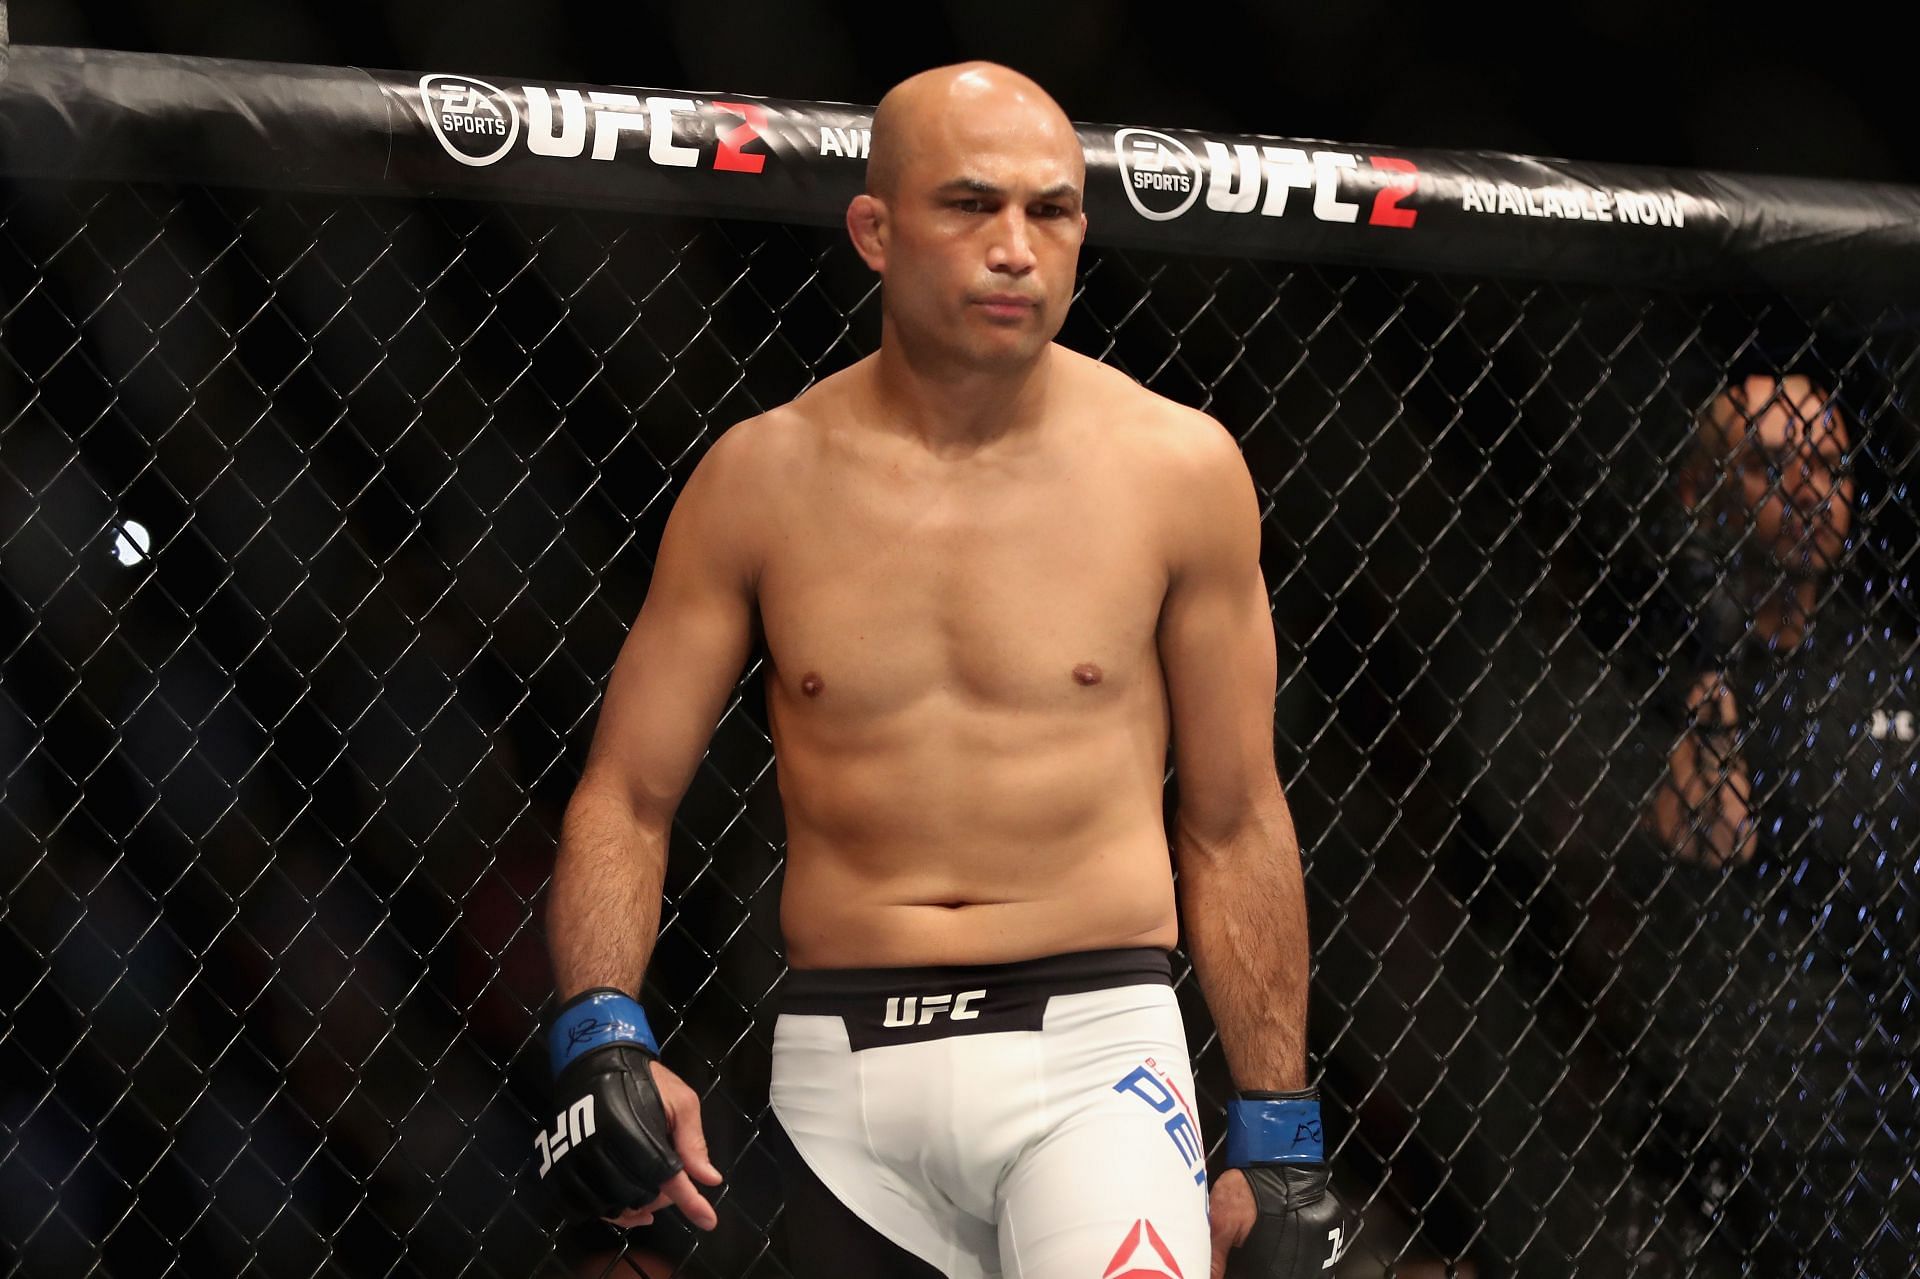 BJ Penn stuck around too long and damaged his record in the process